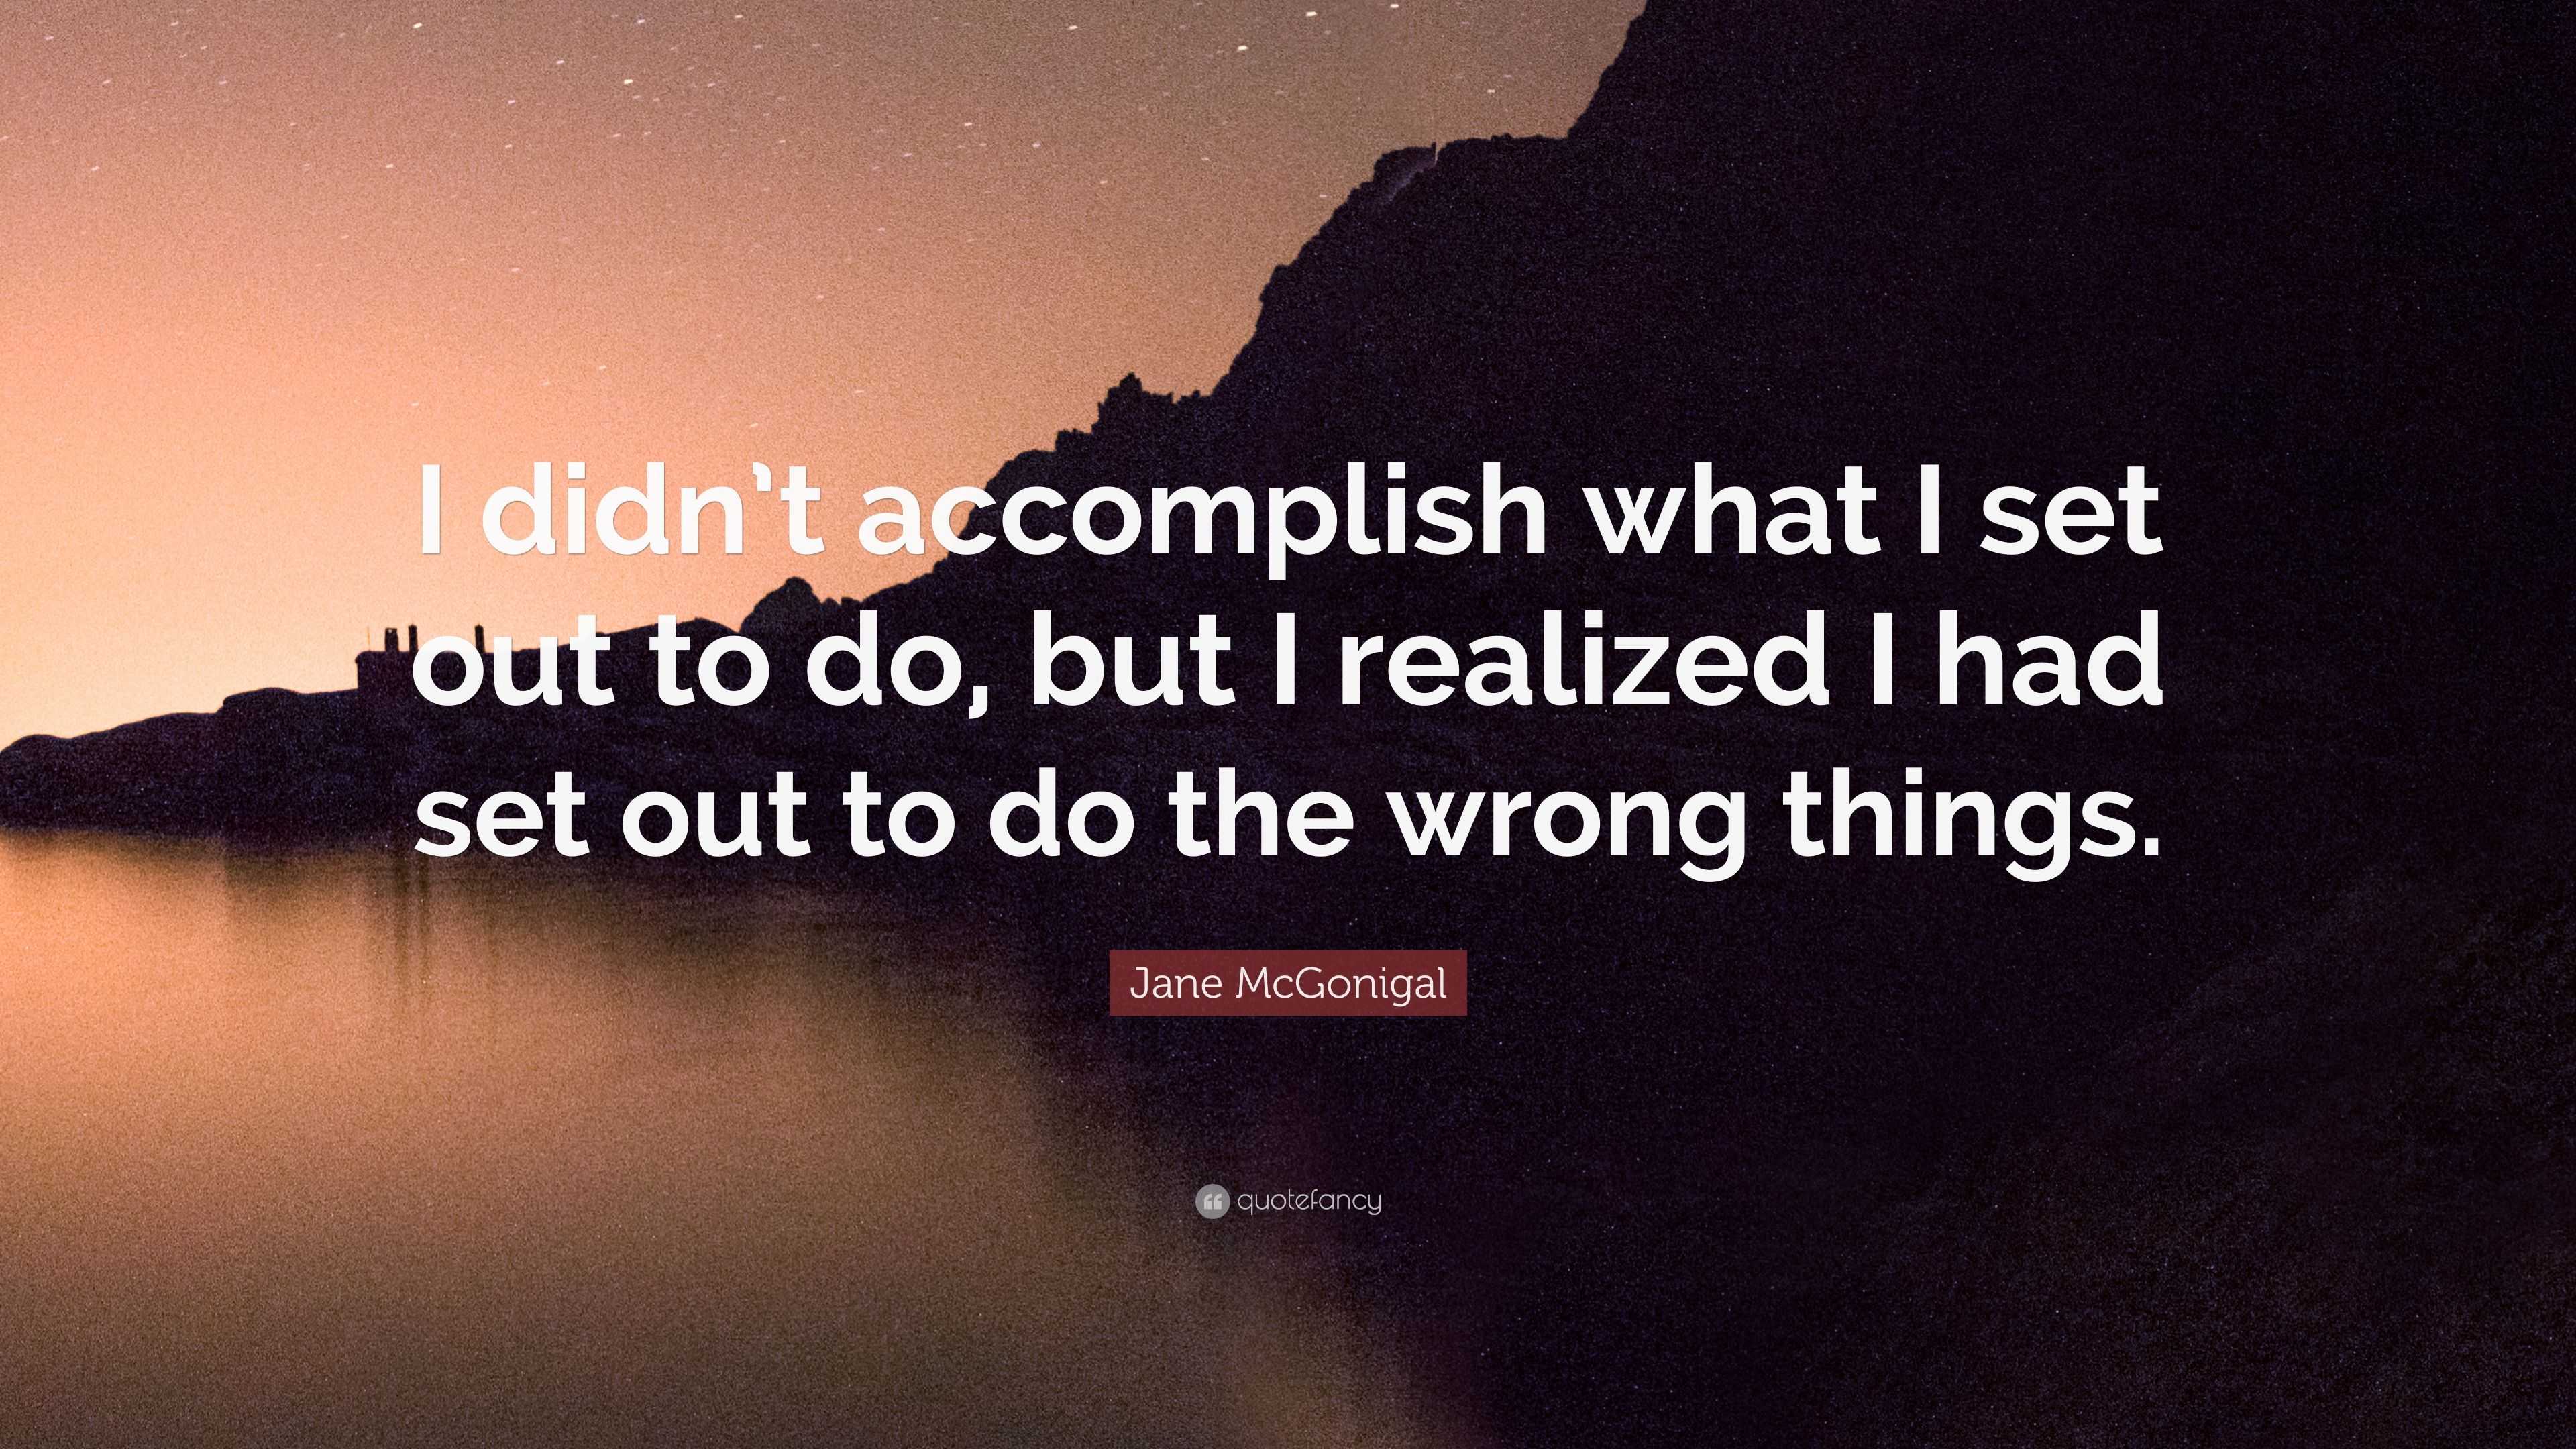 Jane McGonigal Quote: “I didn’t accomplish what I set out to do, but I